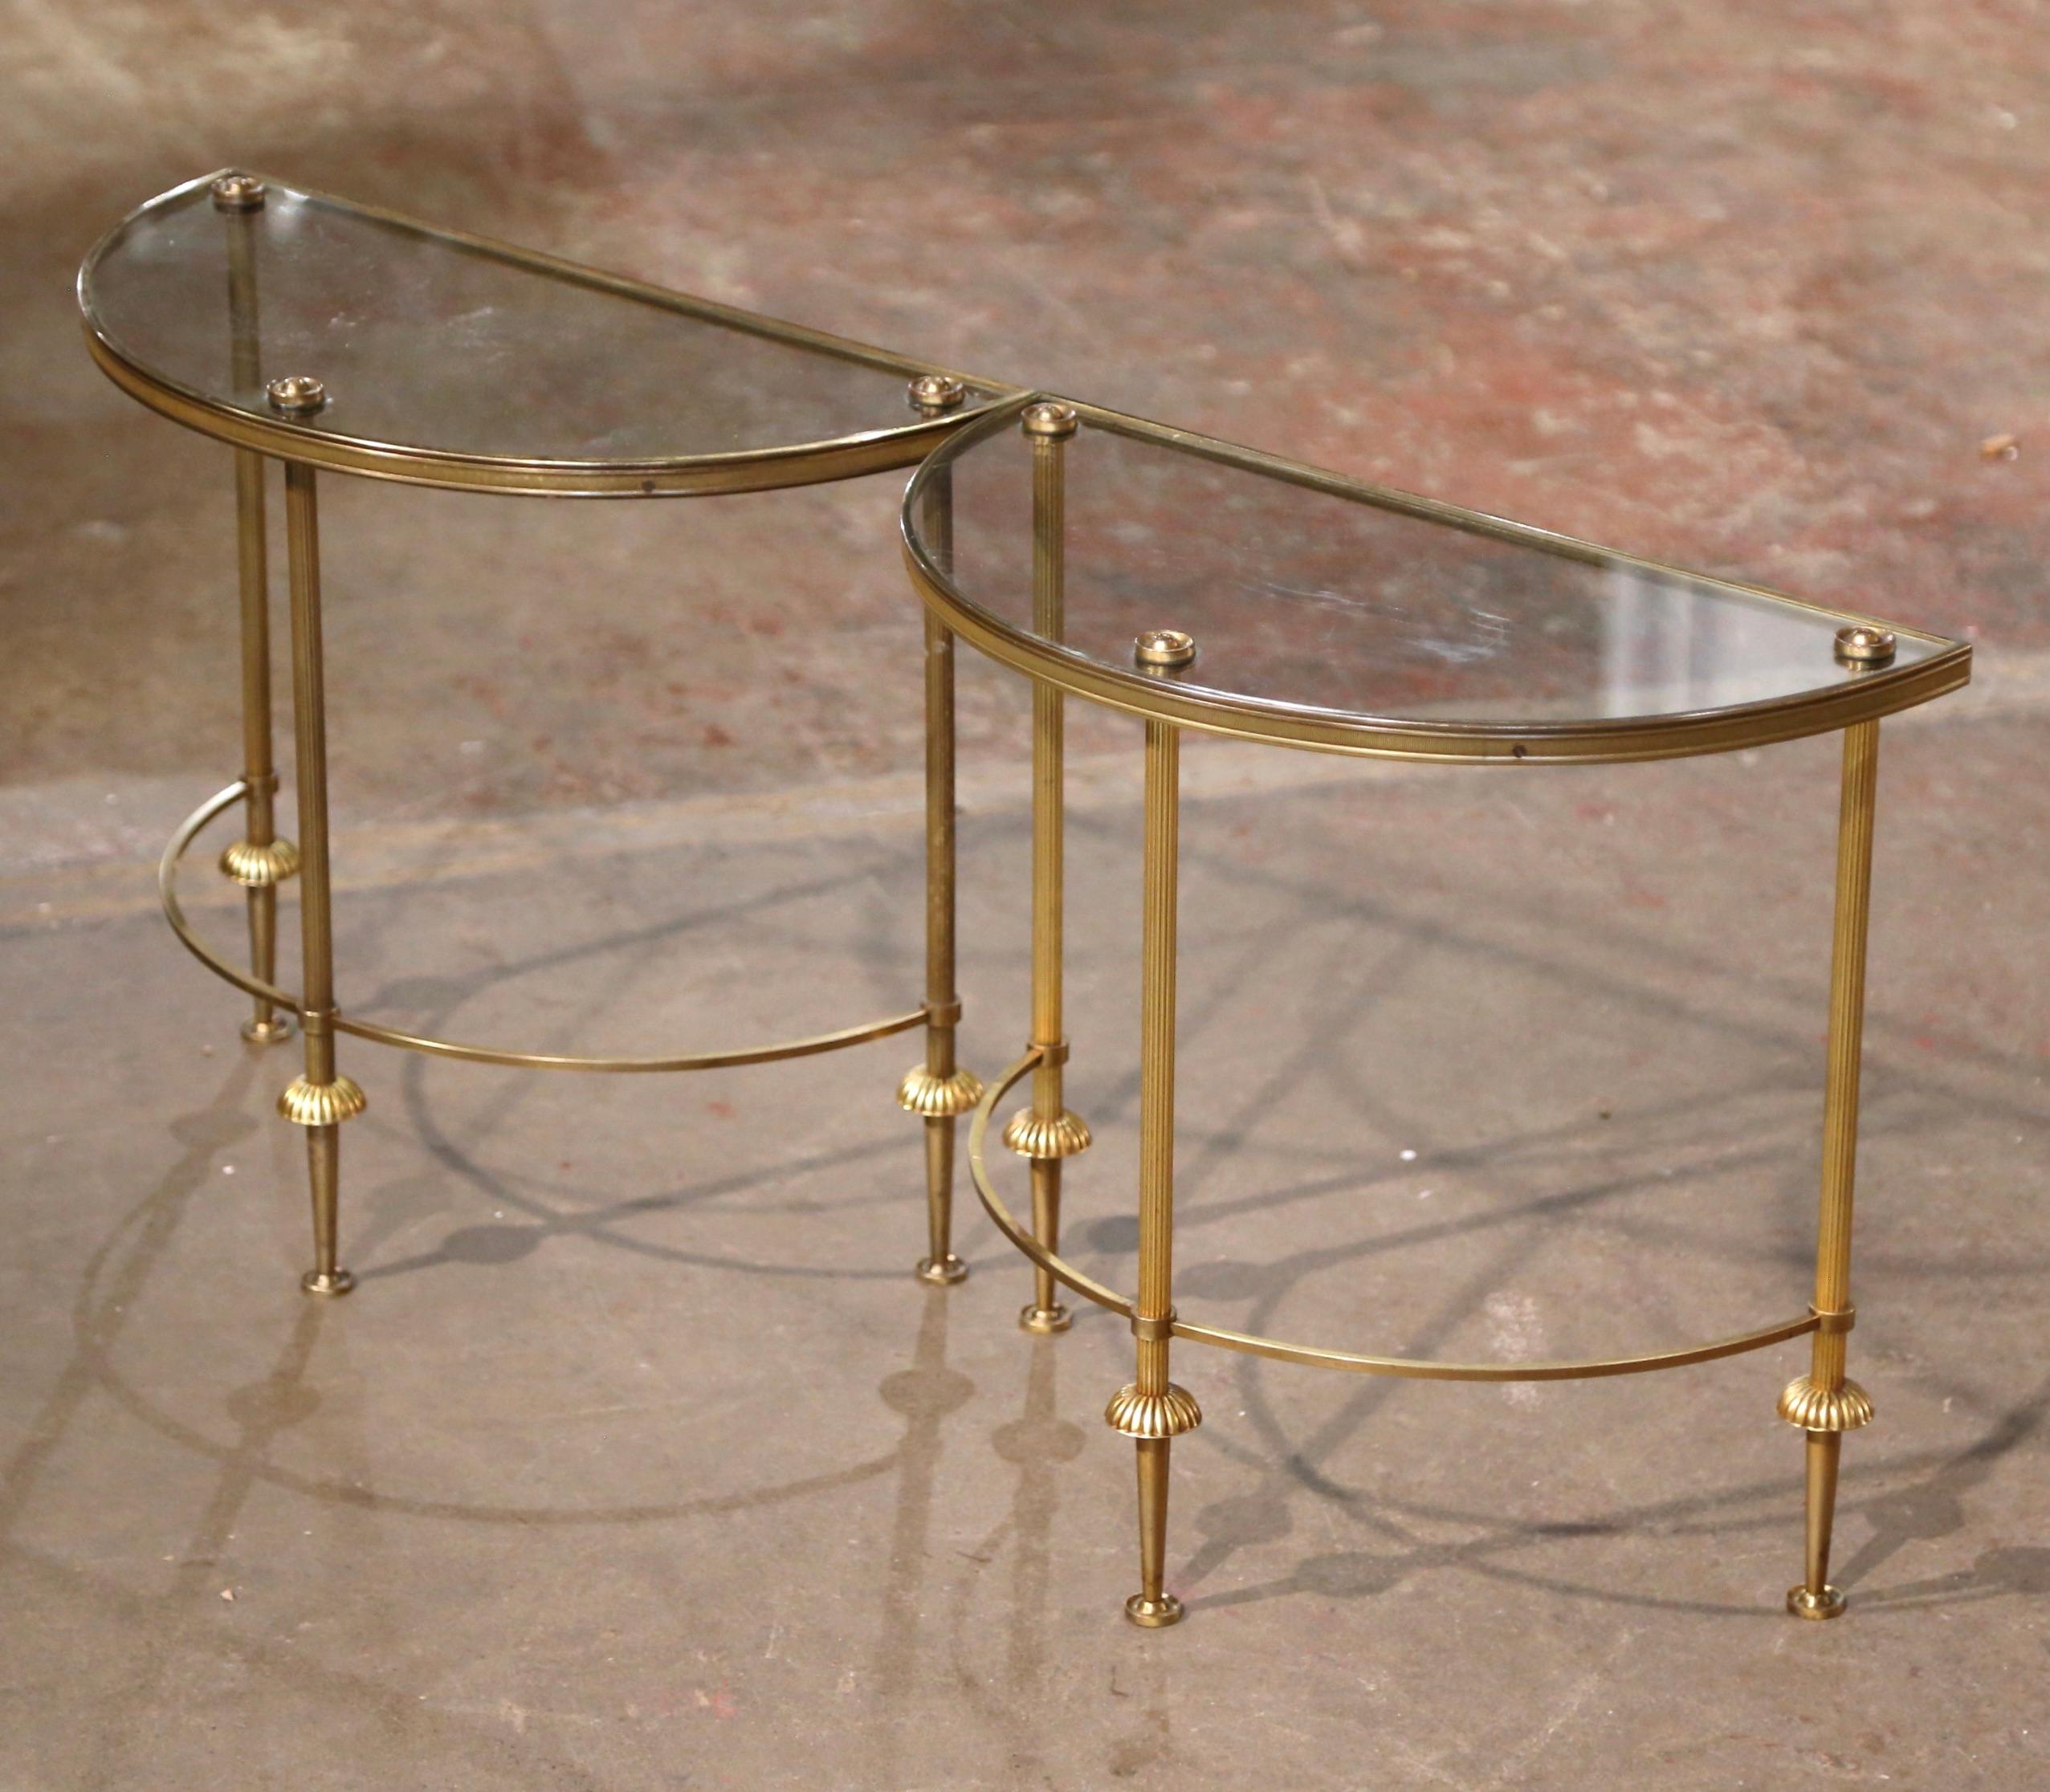 Hand-Crafted Pair Mid-Century French Brass & Glass Demi-Lune Side Tables Maison Baguès Style